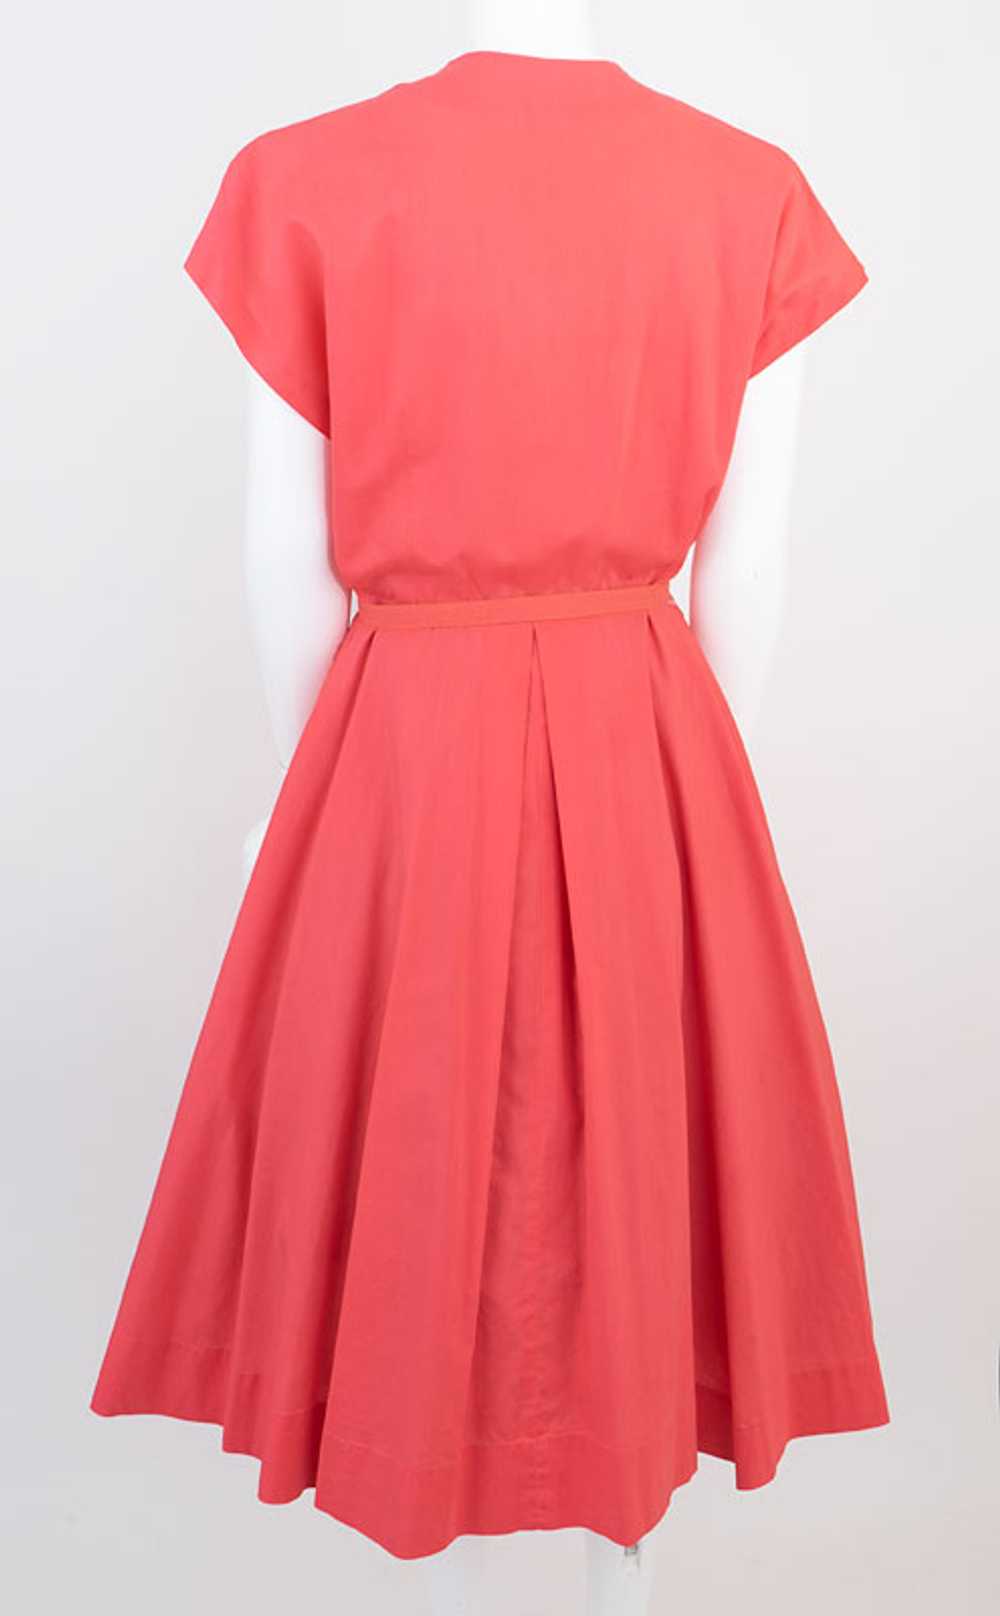 Pretty in Pink 1950s Dress - image 5